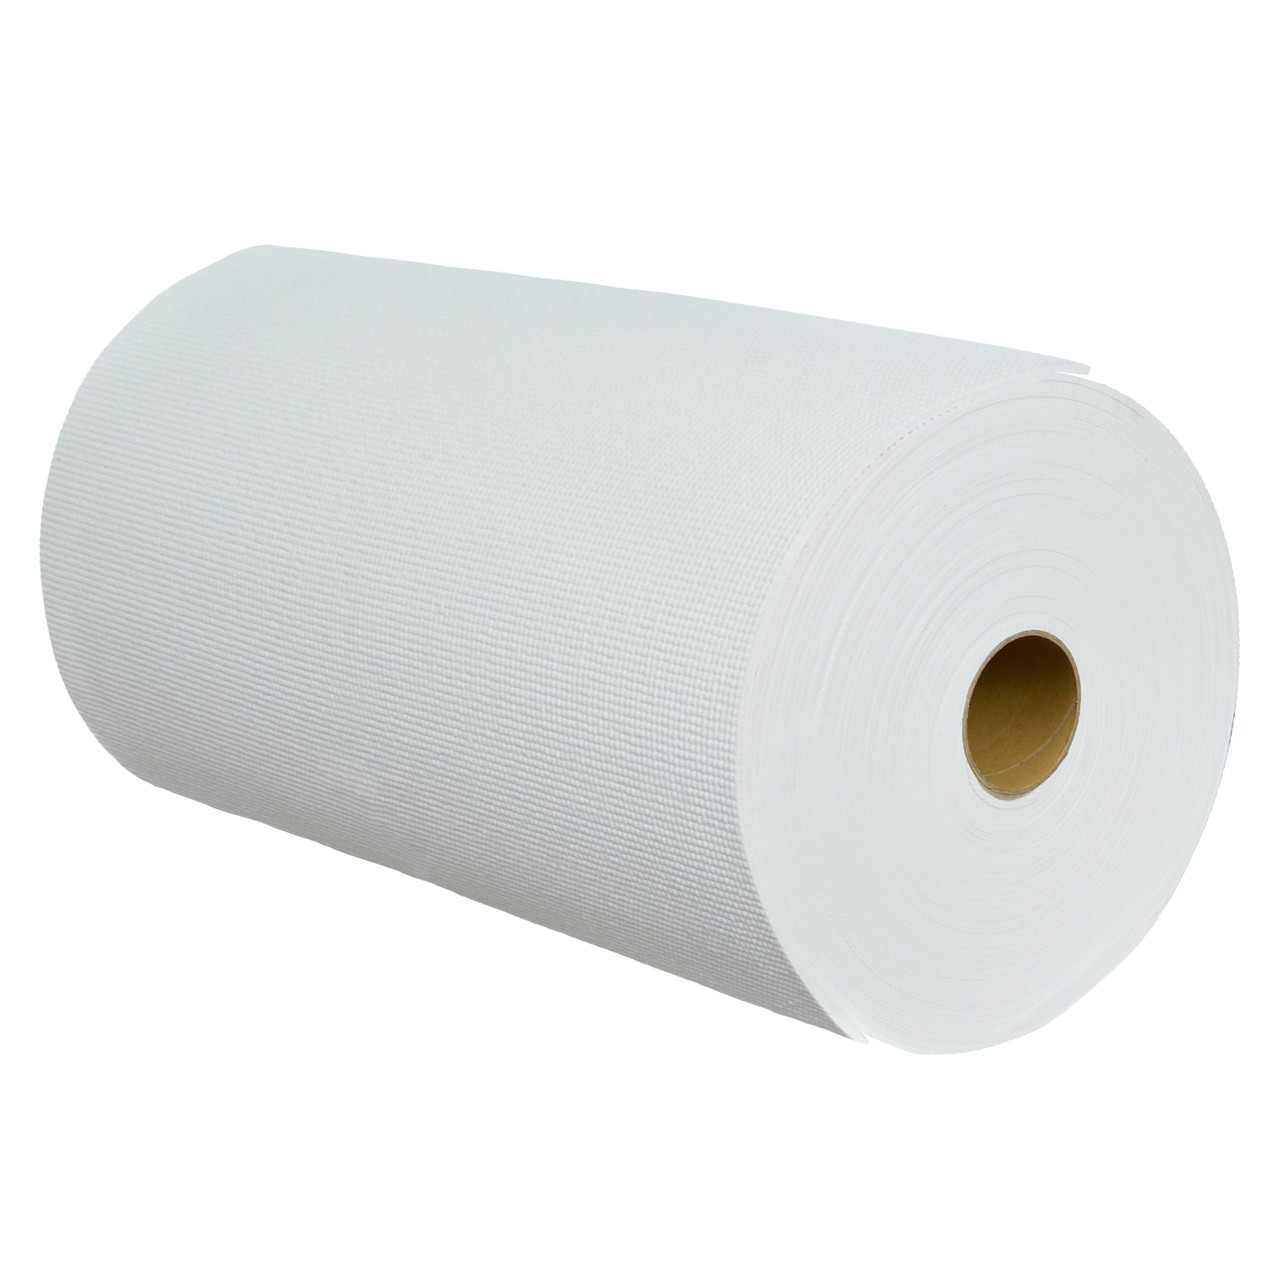 Voyage Yoga Mat Roll (24x 5mm x 50 ft) for Sale